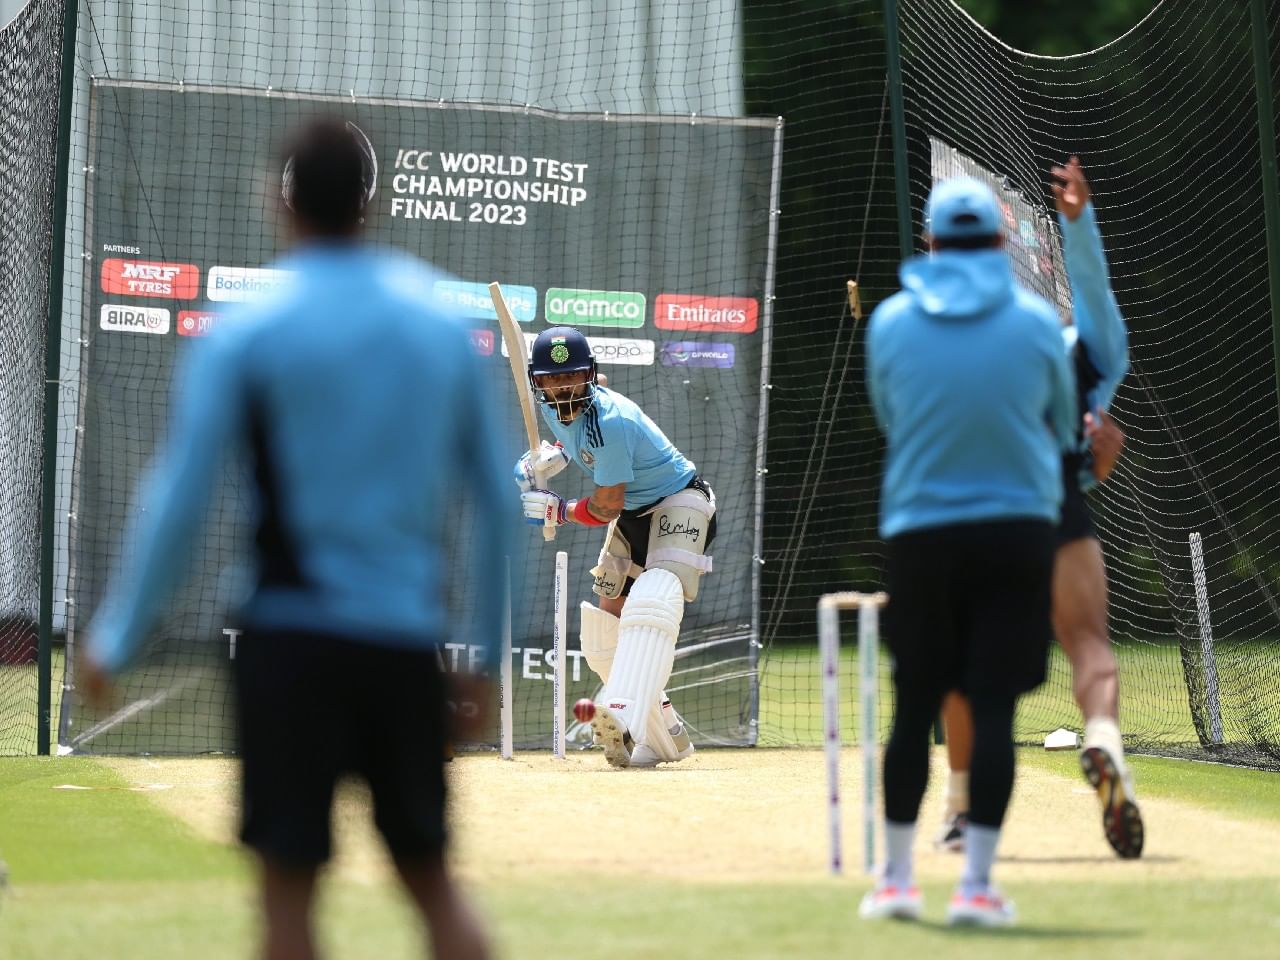 World Test Championship Final: Indian team begin preparations at Sussex ahead of big finale against Australia